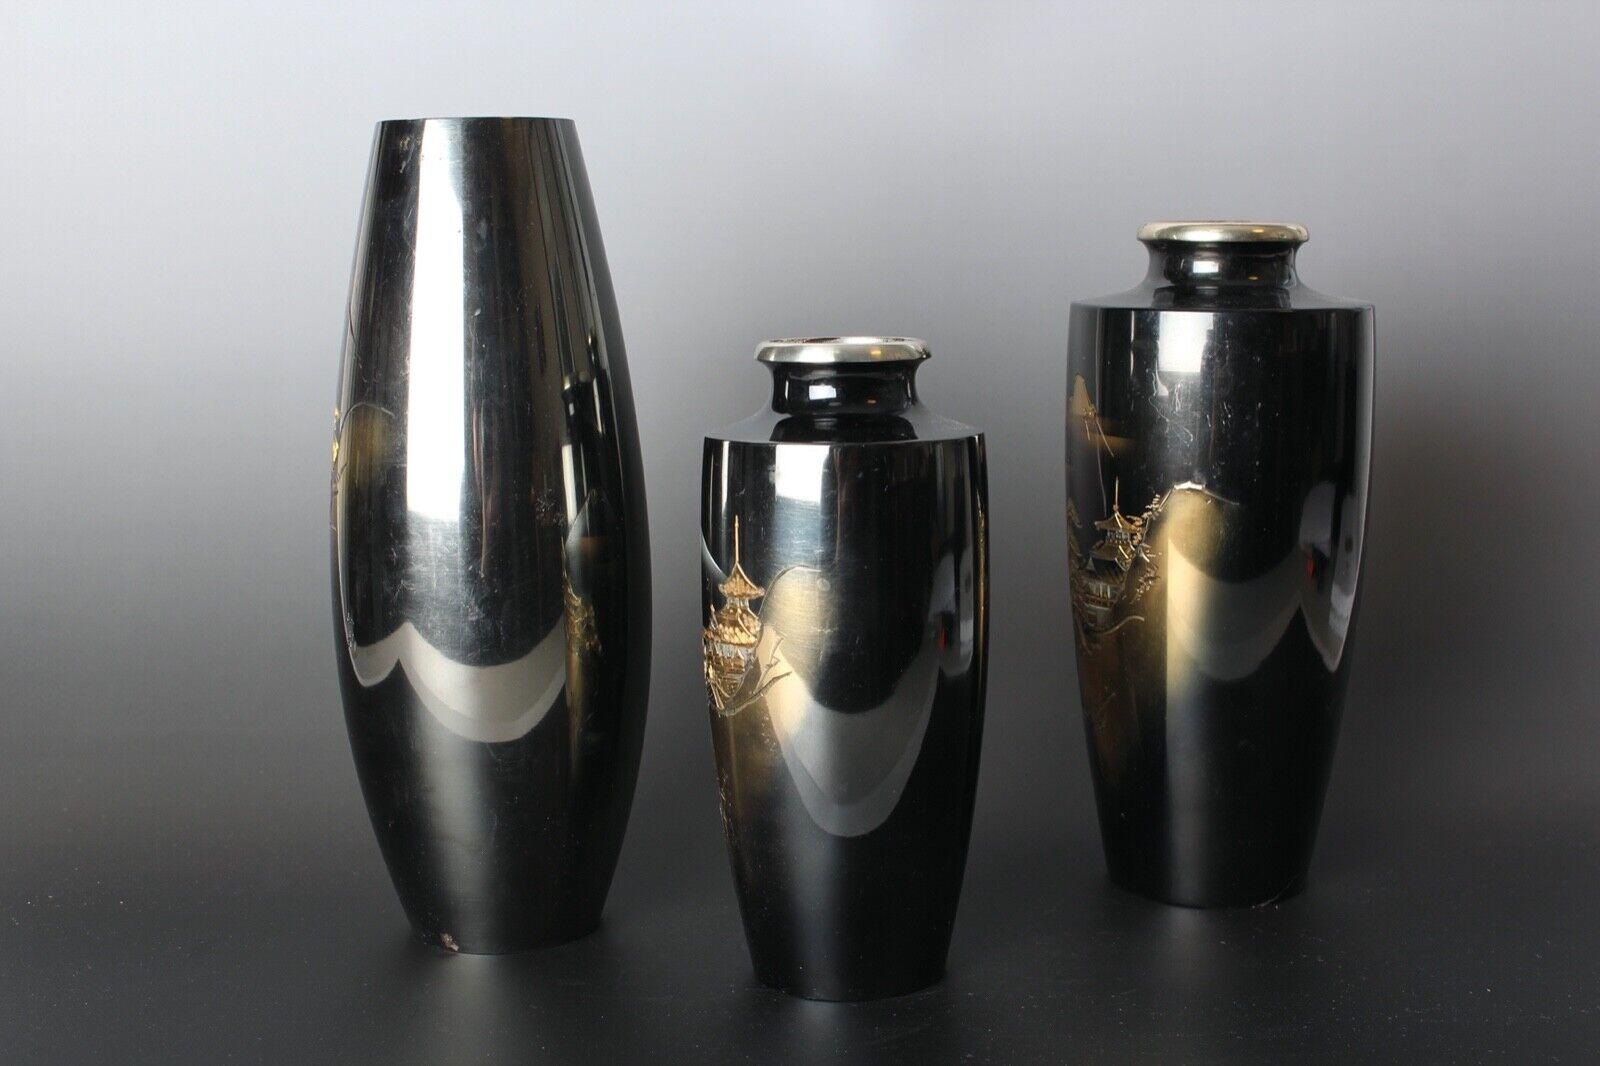 Stunning set of 3 copper metal vases with gorgeous dark plating, incised gold design. Dimensions: tallest vase - w.9cm (3.5 inches), h.25cm (9.8 inches); smallest vase - w.18cm (7 inches), h.7.5cm (2.9 inches). Total weight: 1.8kg (3.9 lbs). Some